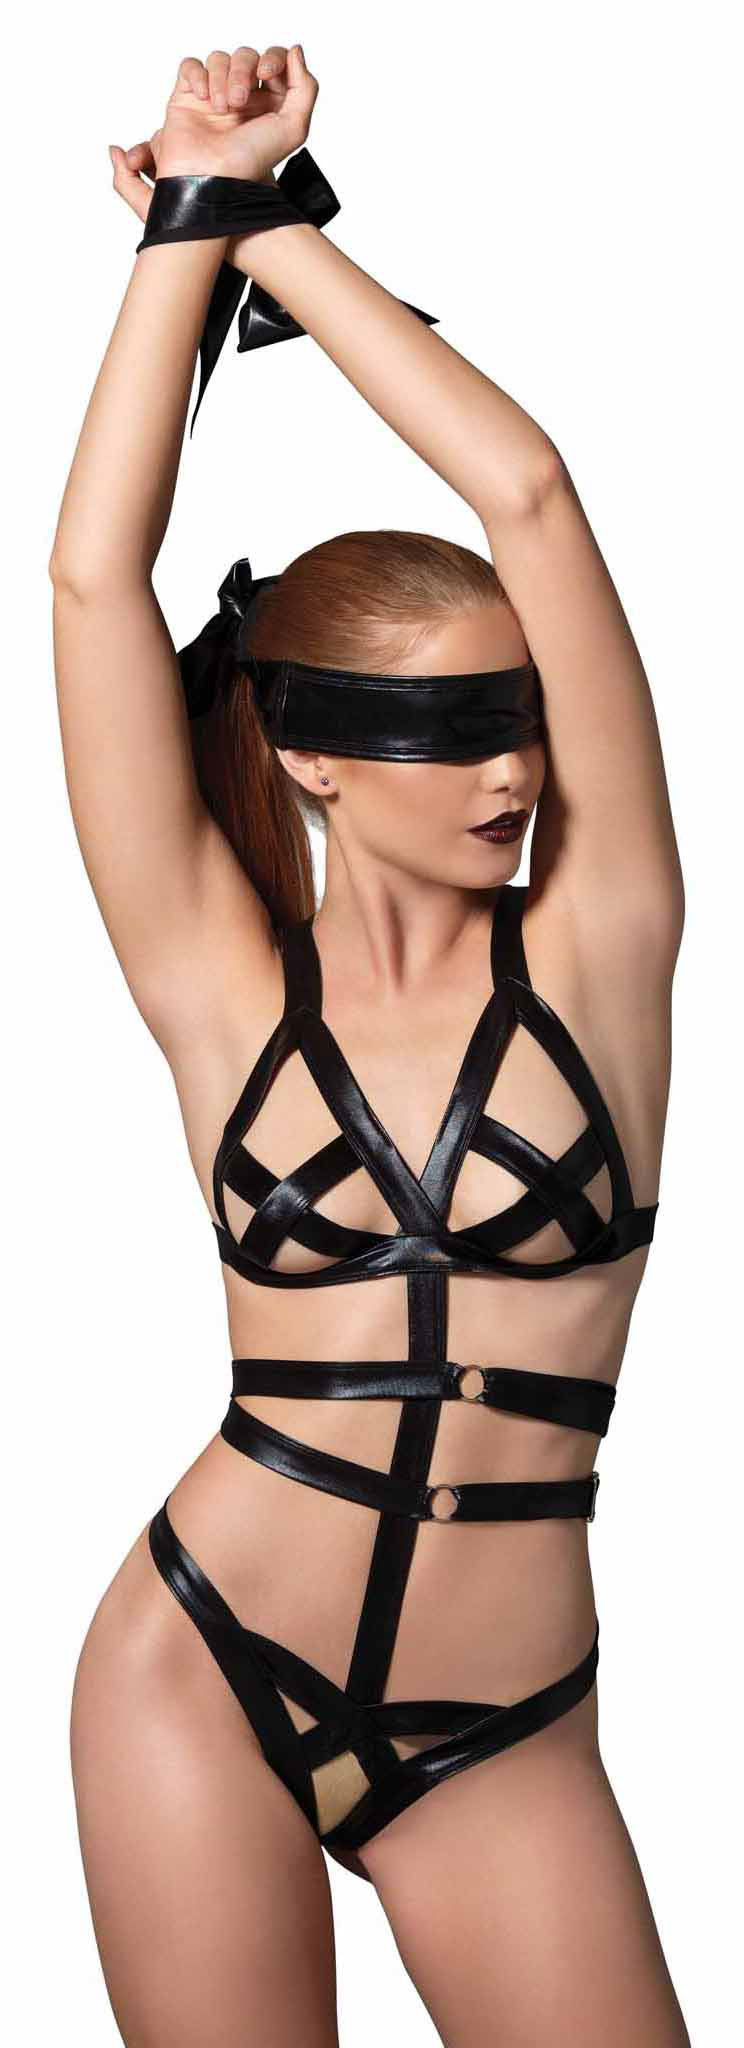 3 Piece Wet Look Bondage G-String Teddy with Restraints - AG811 - UPC-714718514567